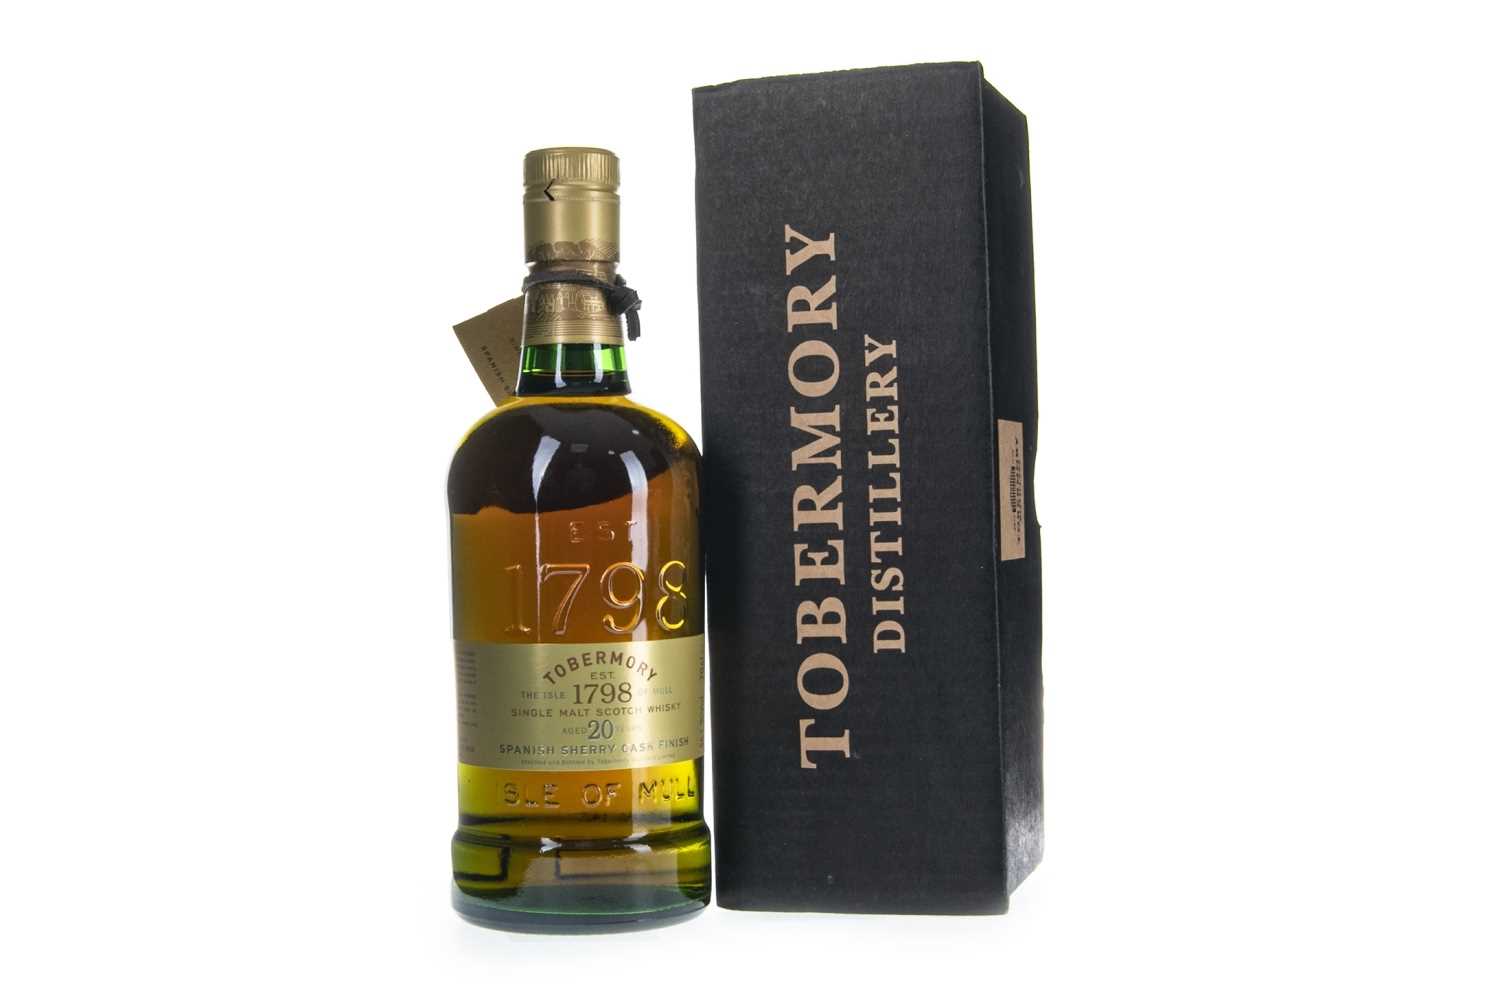 Lot 13 - TOBERMORY SHERRY CASK FINISH AGED 20 YEARS